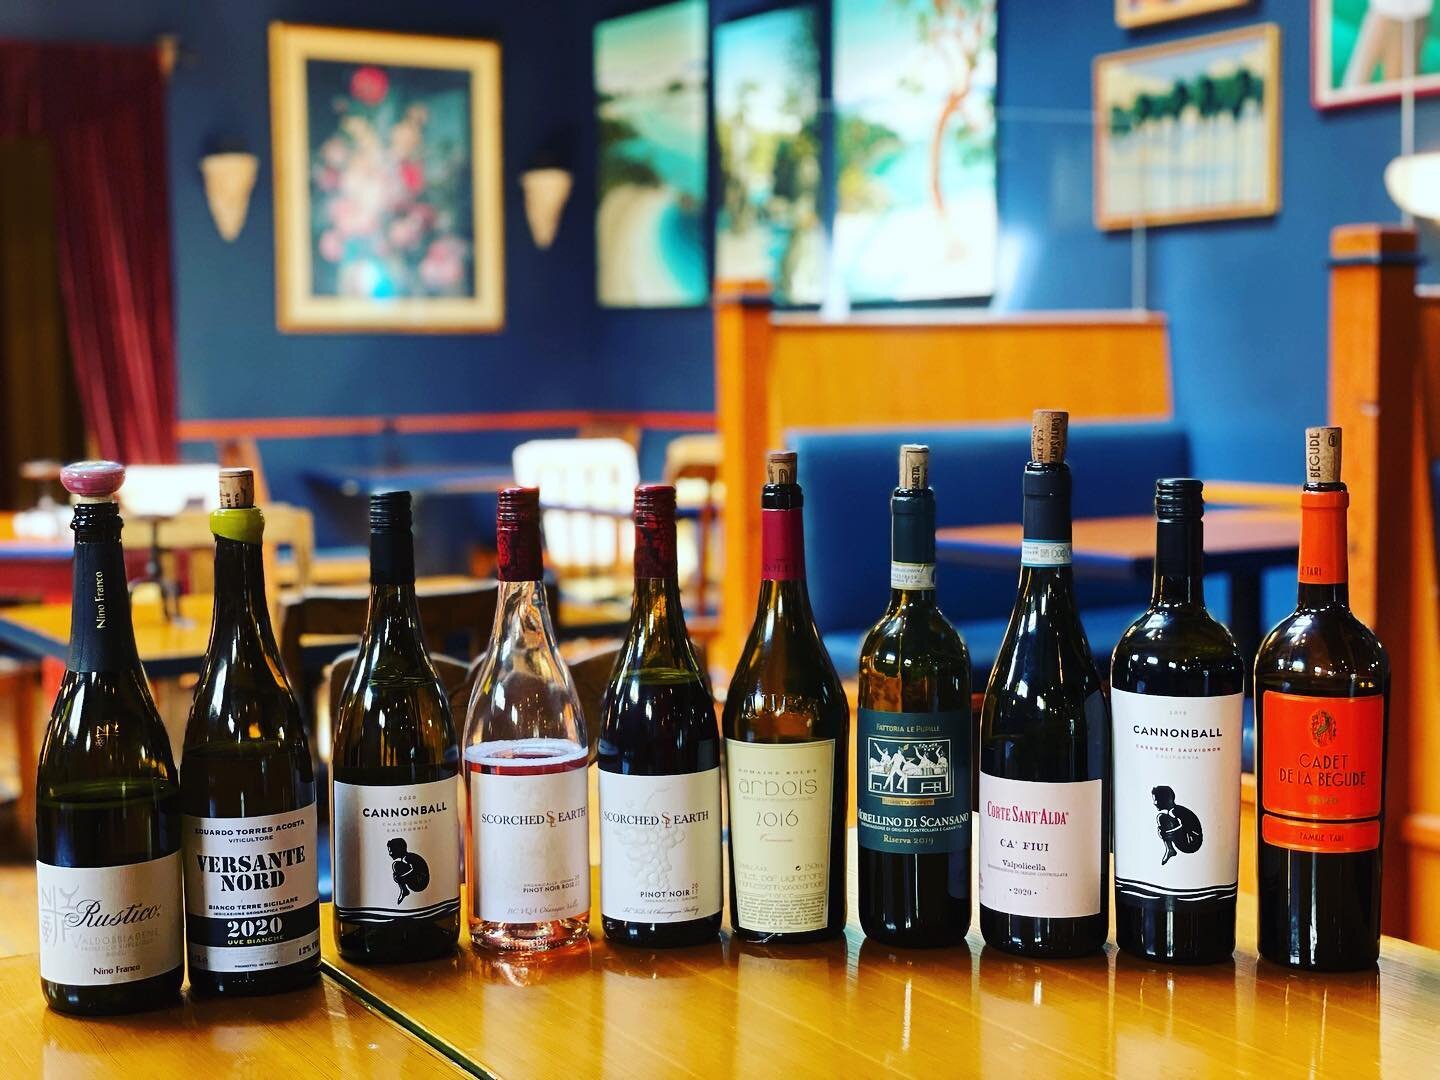 This is what we call a serious line-up!

A very busy few days visiting Victoria with a lot of amazing wines to taste! 

@ninofranco1919 @eduardotorresacosta @cannonballwines @scorchedearthwinery @domainerolet @fattorialepupille__official @az.agr.came